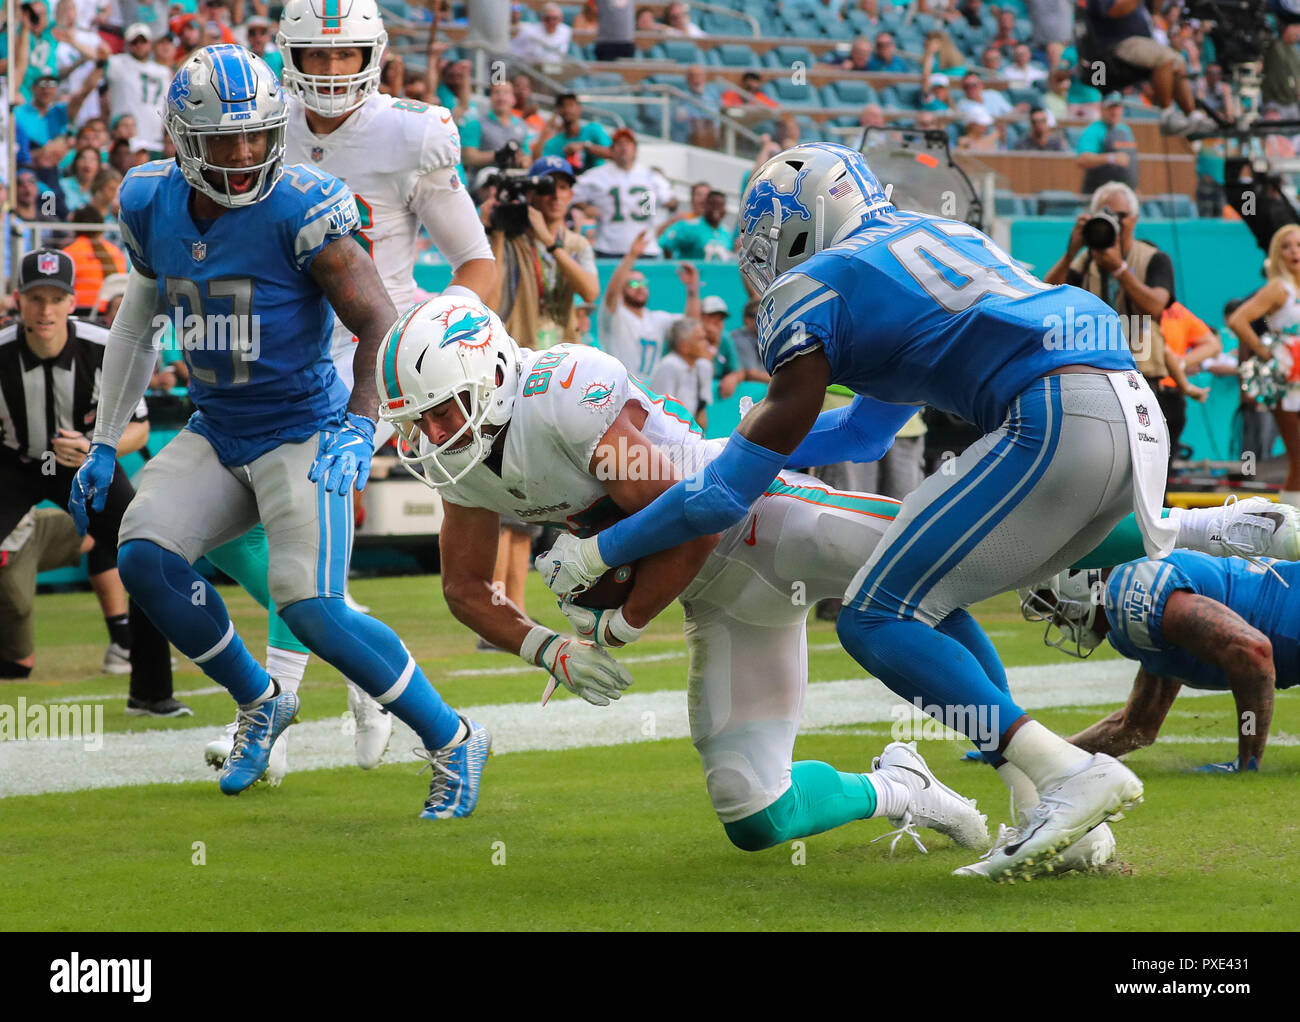 Miami Gardens, Florida, USA. 21st Oct, 2018. Miami Dolphins wide receiver Danny Amendola (80) scores a touchdown in the fourth quarter challenged by Detroit Lions defensive back Tracy Walker (47) during a NFL football game between the Detroit Lions and the Miami Dolphins at the Hard Rock Stadium in Miami Gardens, Florida. Credit: Mario Houben/ZUMA Wire/Alamy Live News Stock Photo